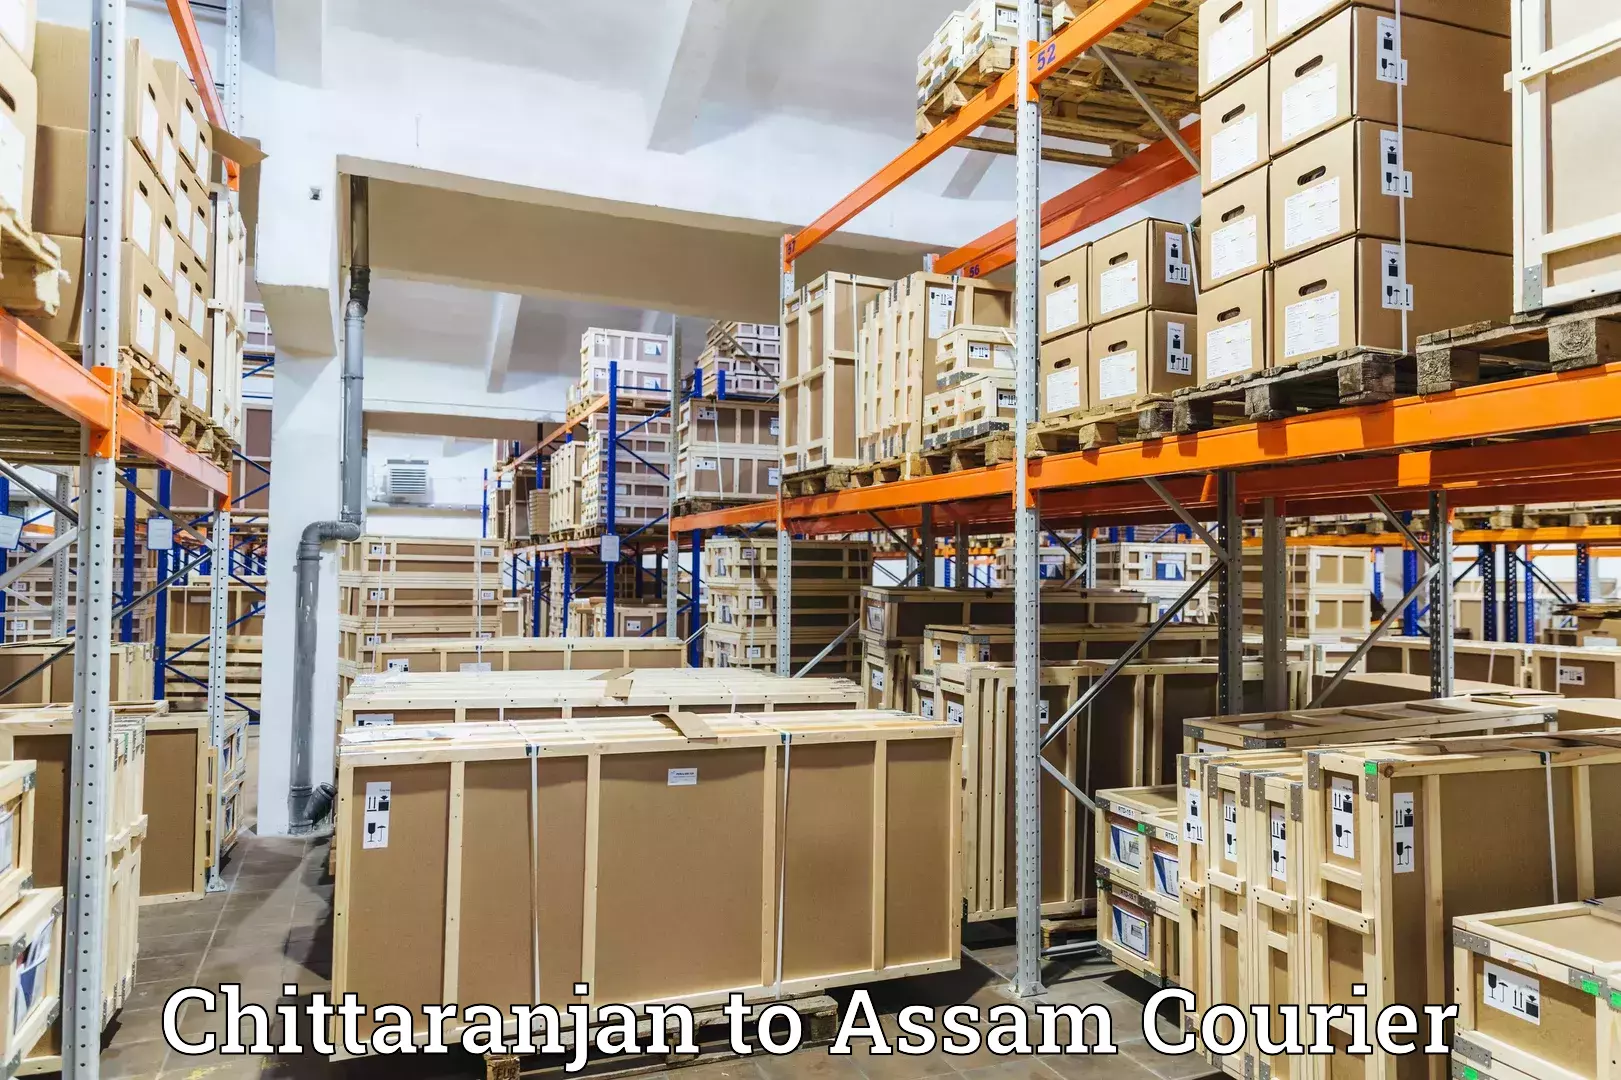 Local delivery service Chittaranjan to Assam